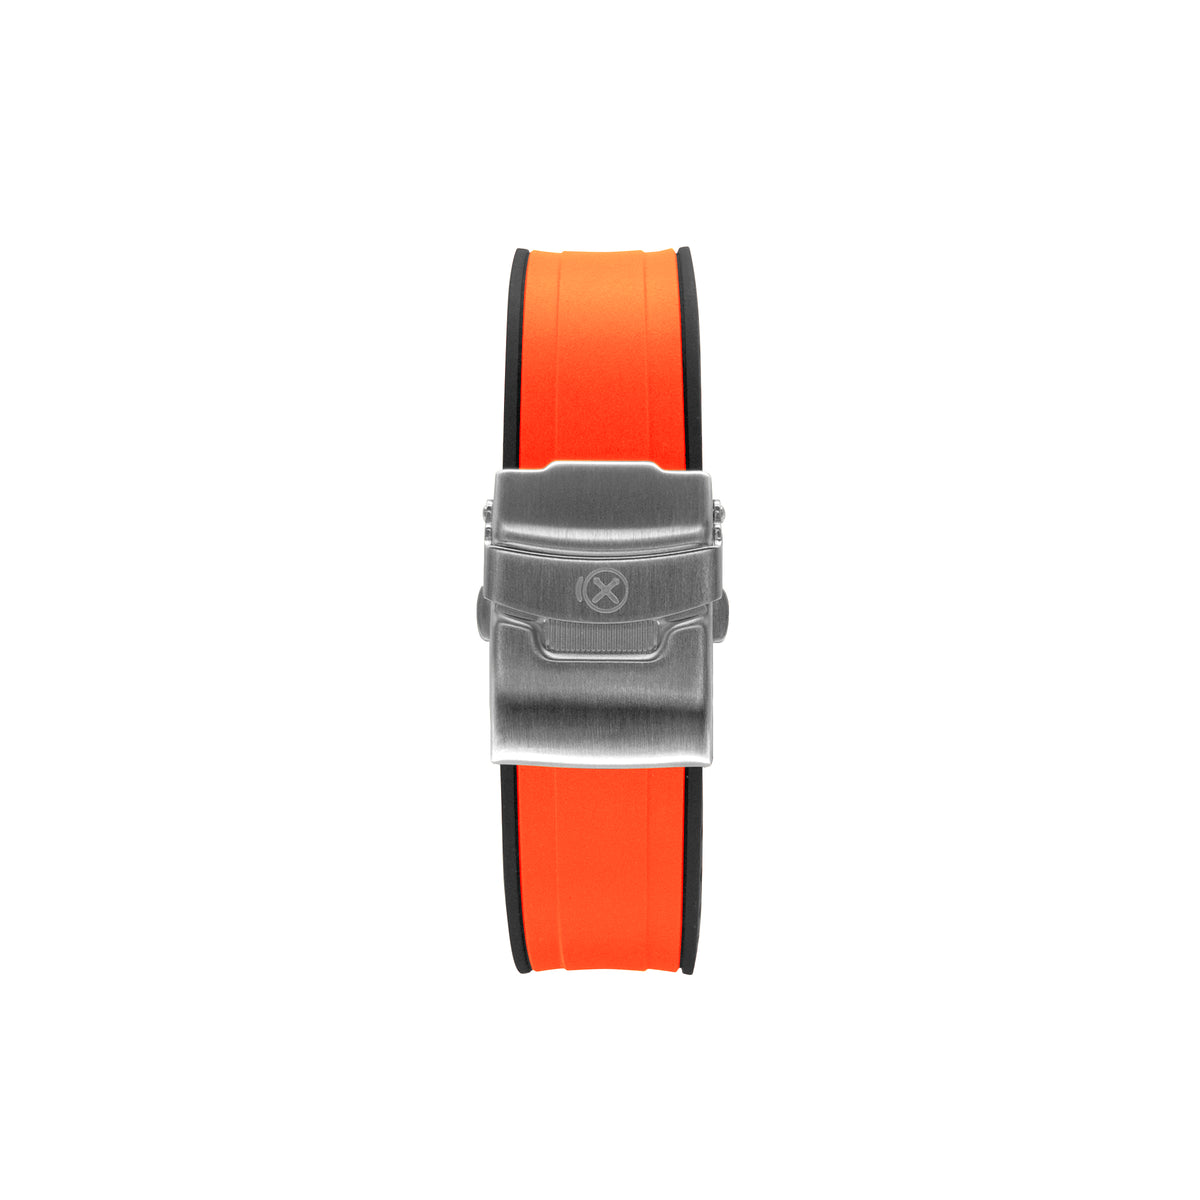 StrapXPro Curved End Rubber Strap for Seiko SKX/5KX in Orange/Black (22mm) - Nomad Watch Works MY